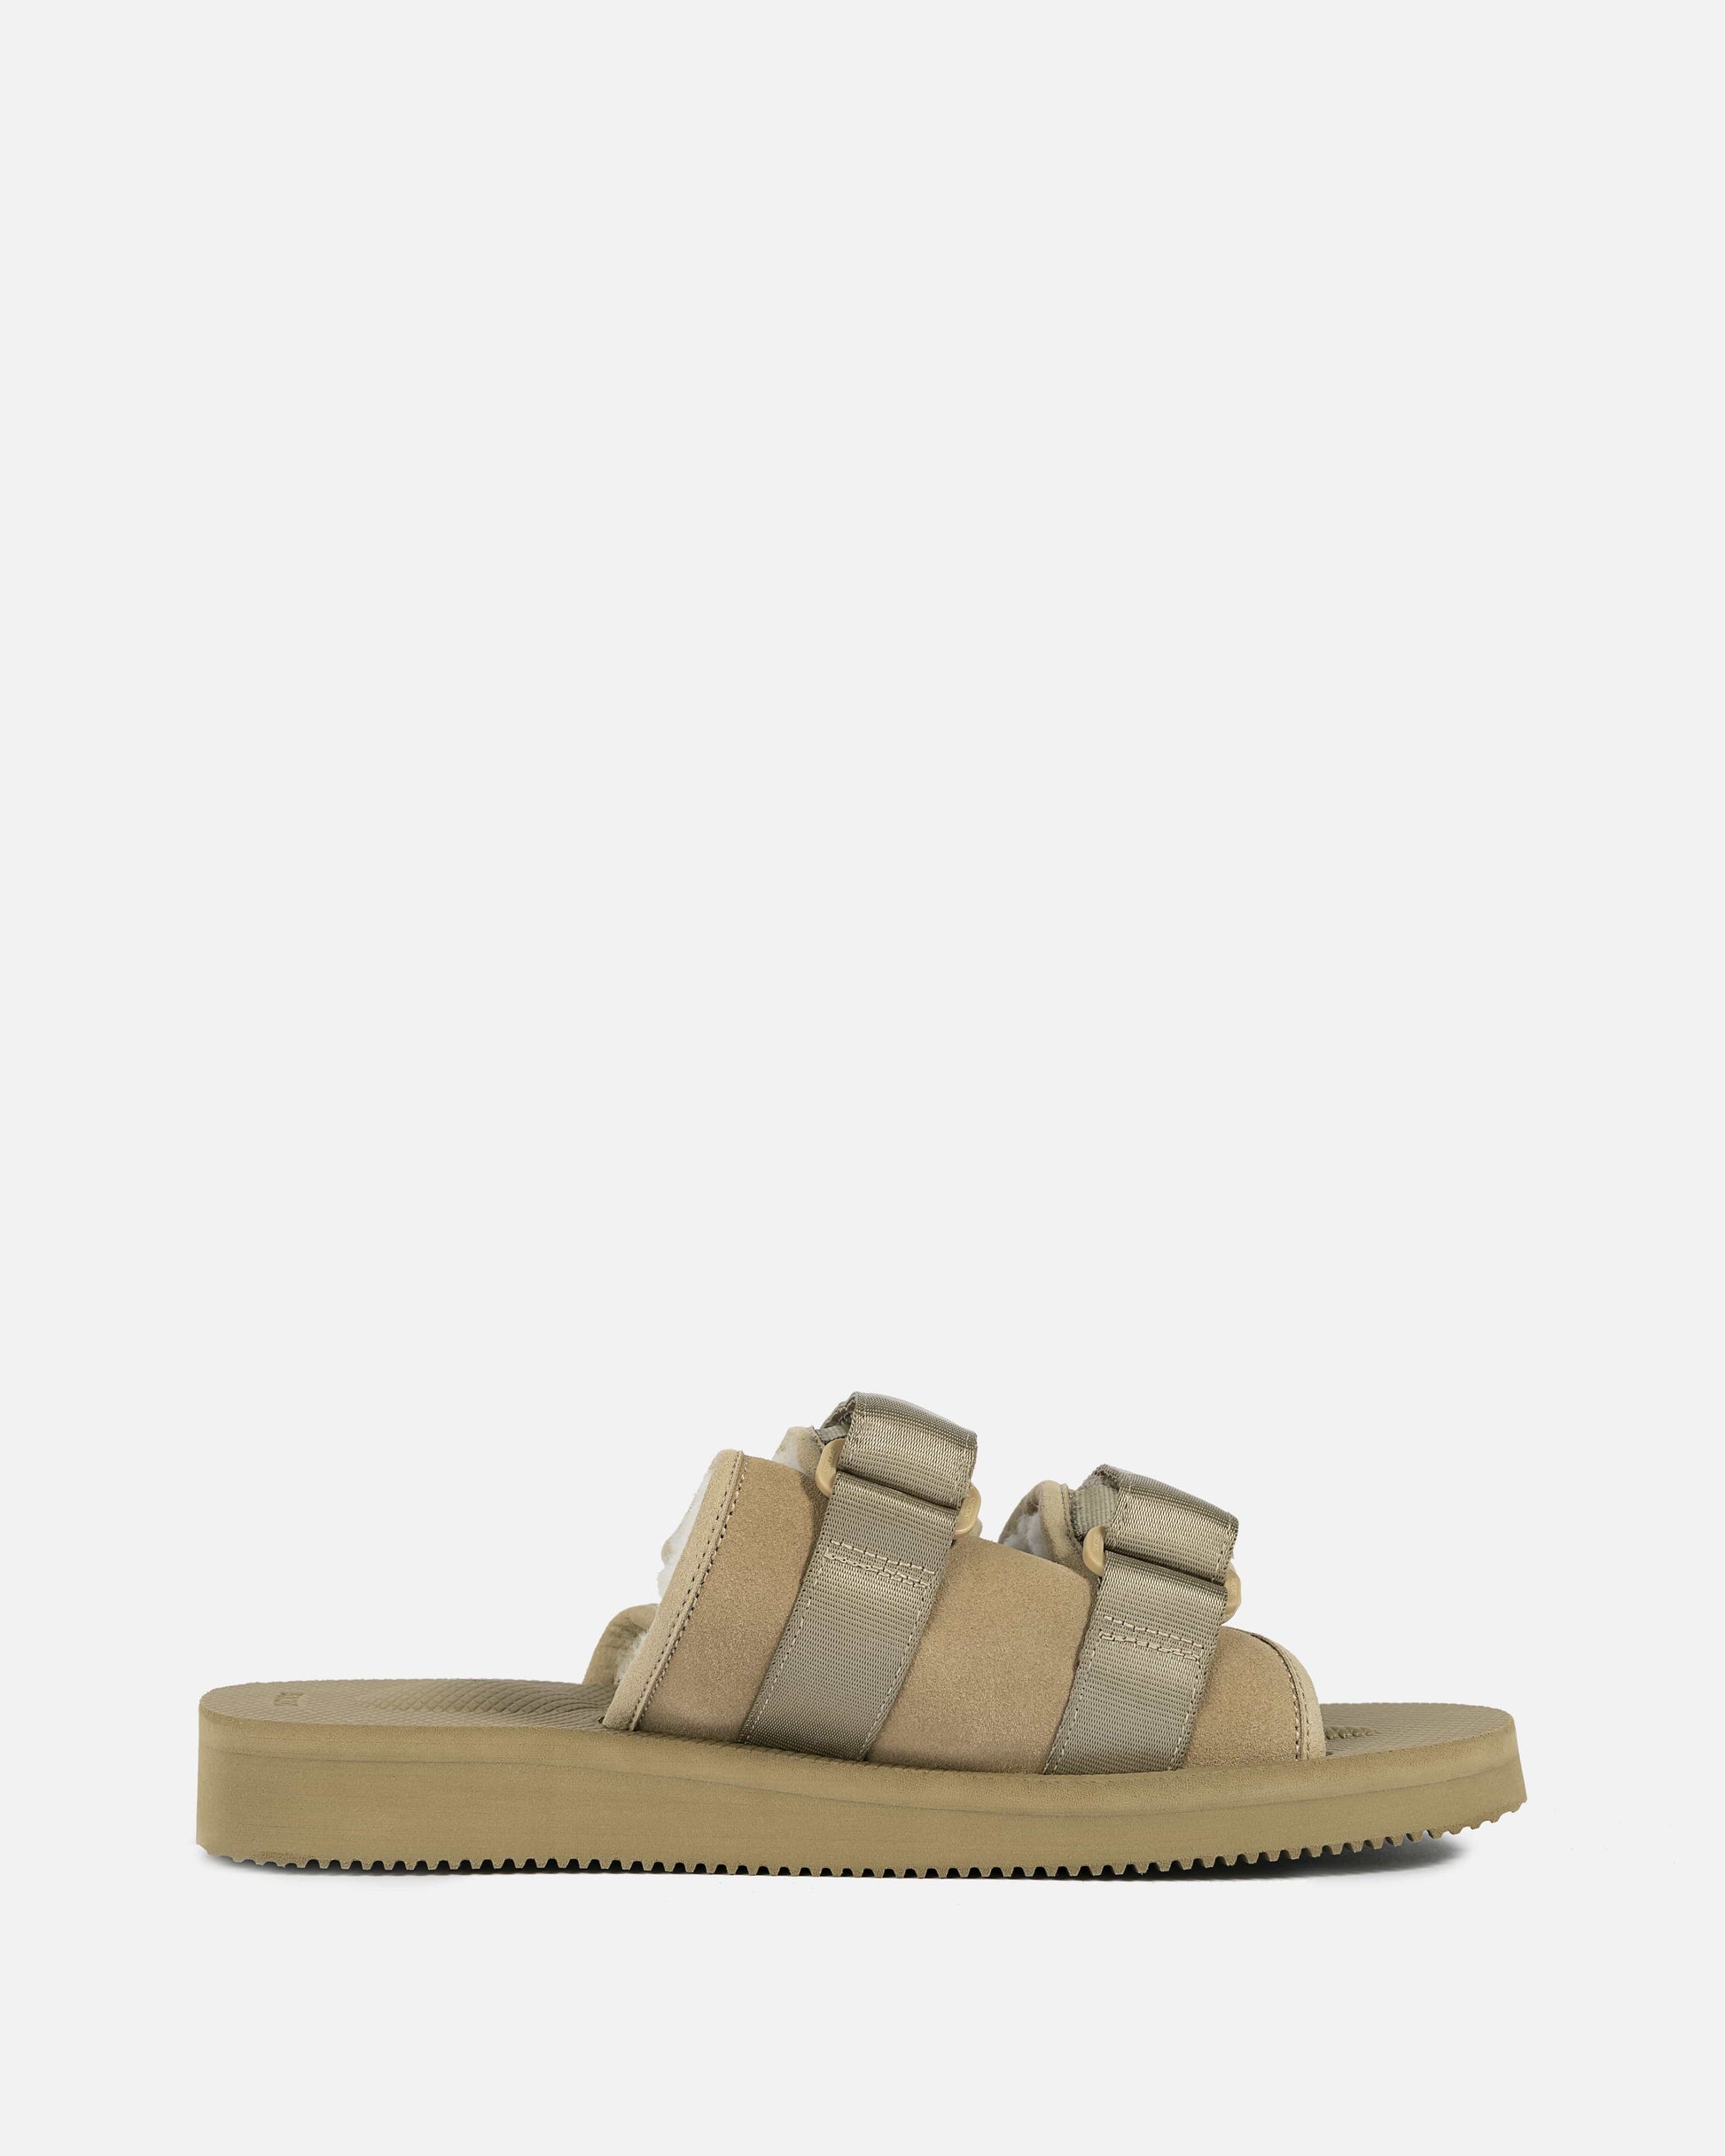 Suicoke Unisex Sandals MOTO-Mab in Taupe